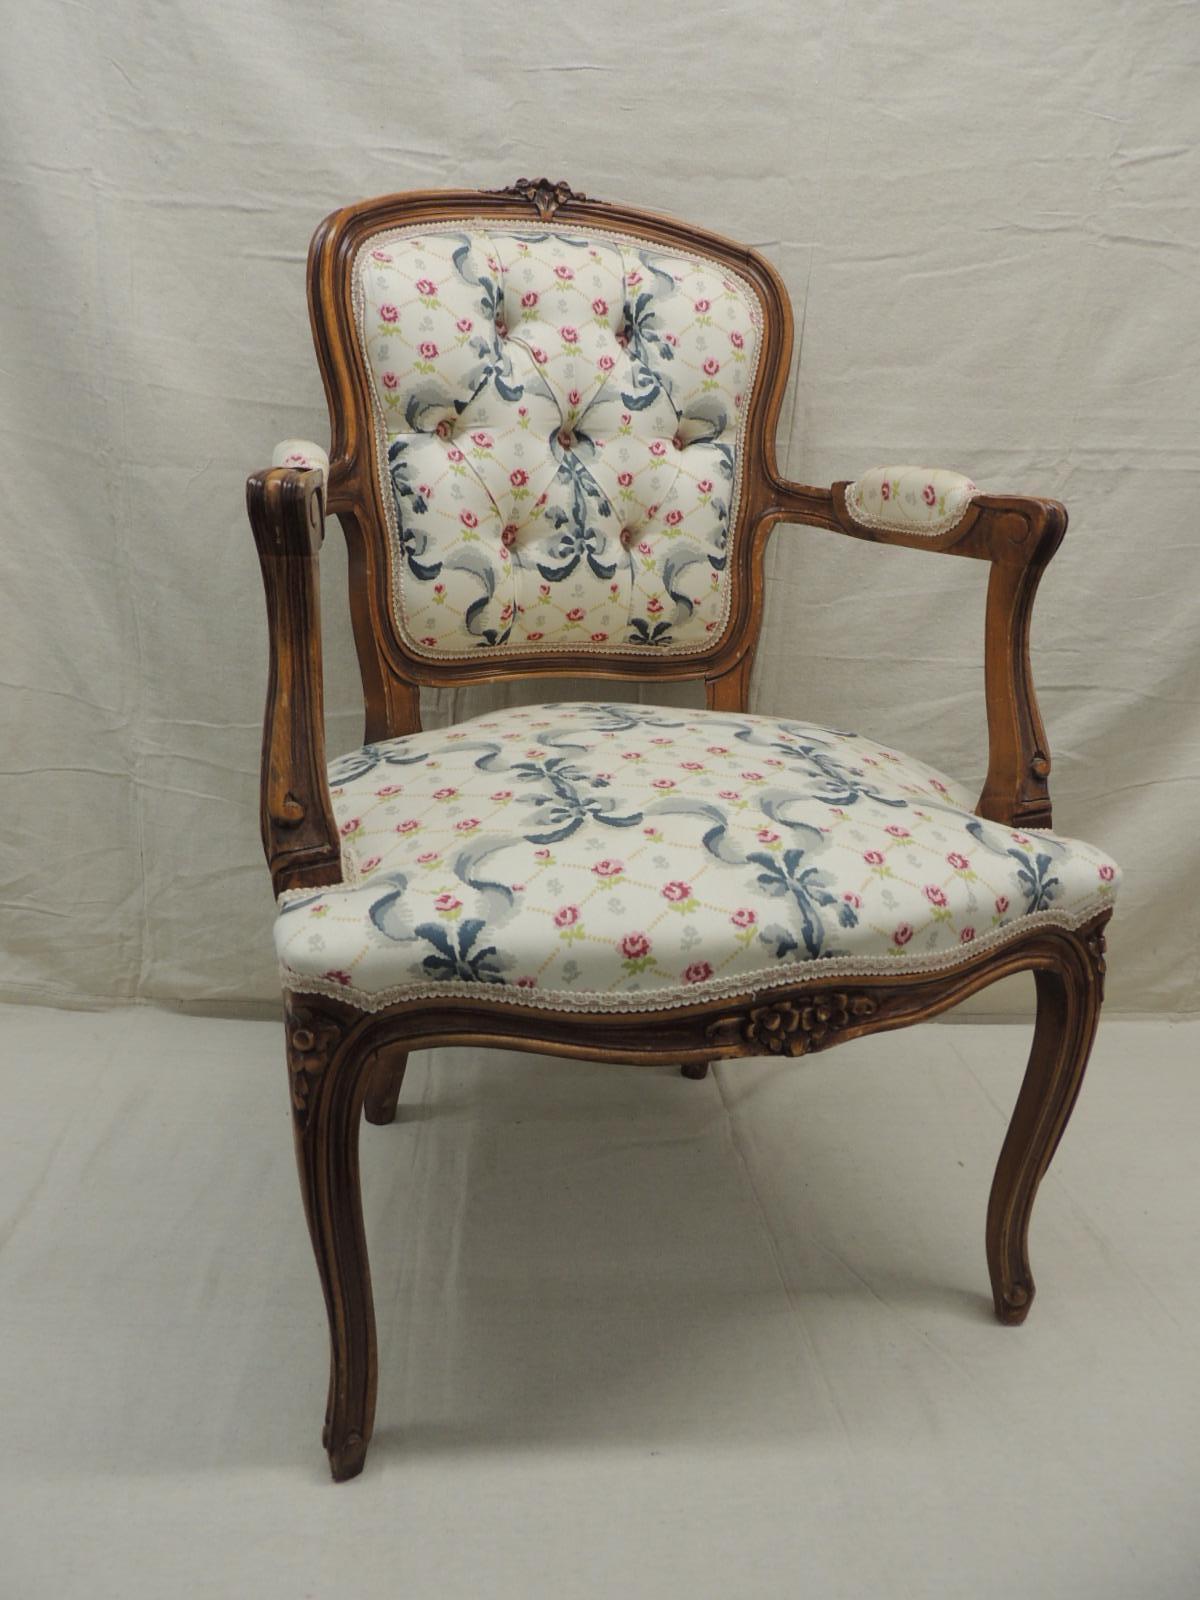 Louis XV style antique petite armchair.
Floral and ribbon cotton fabric upholstery.
In shades of green, blue, pink on an off-white background. Honey color wood frame with padded arms.
Tufted back trim with pink, green and natural gimp all